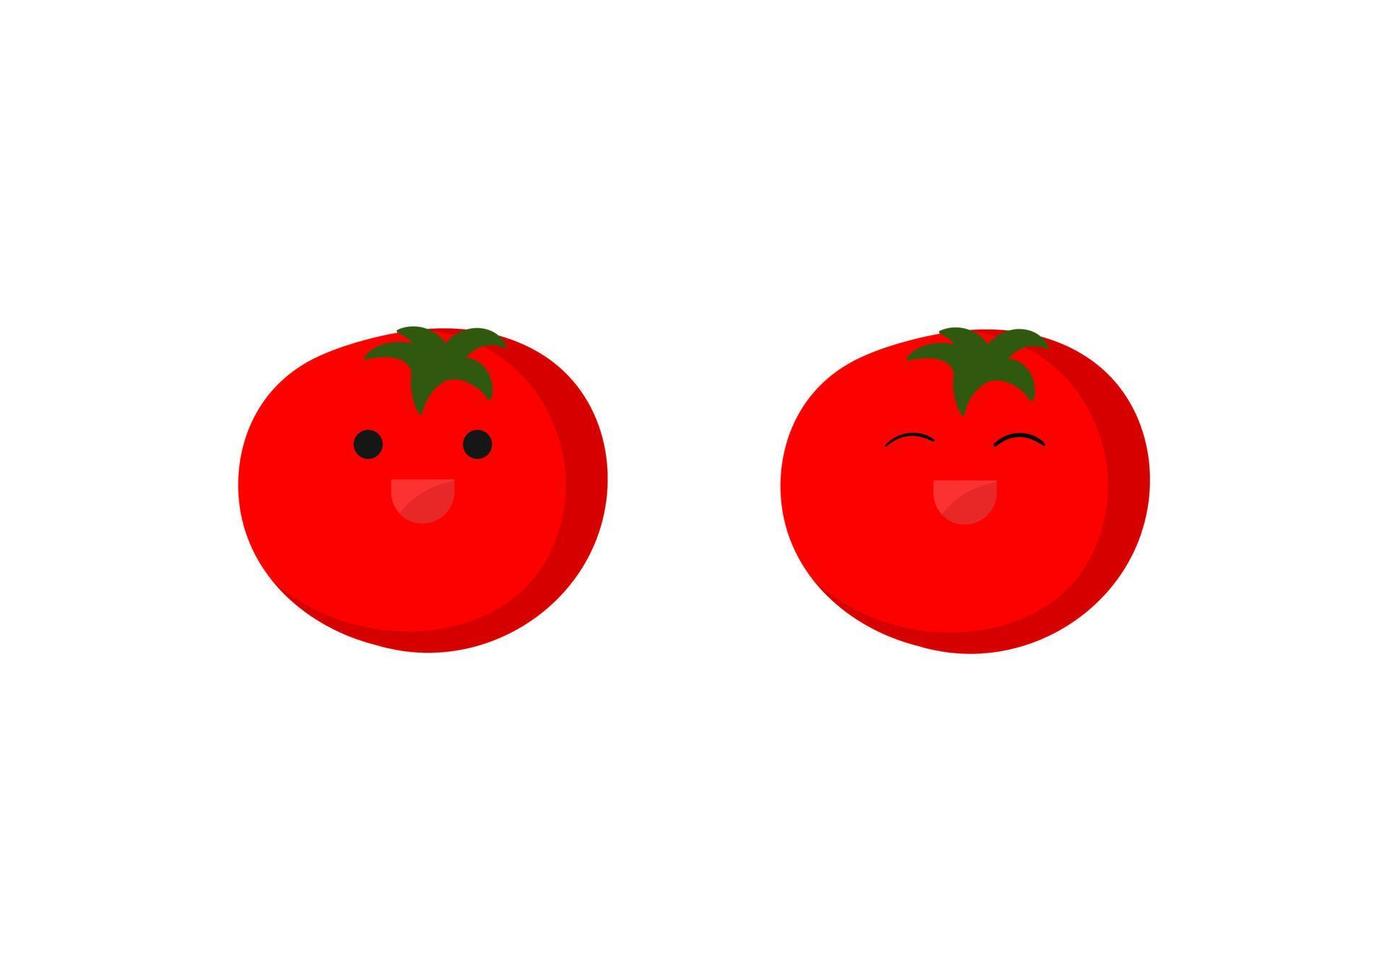 illustration of a tomato vegetable character vector